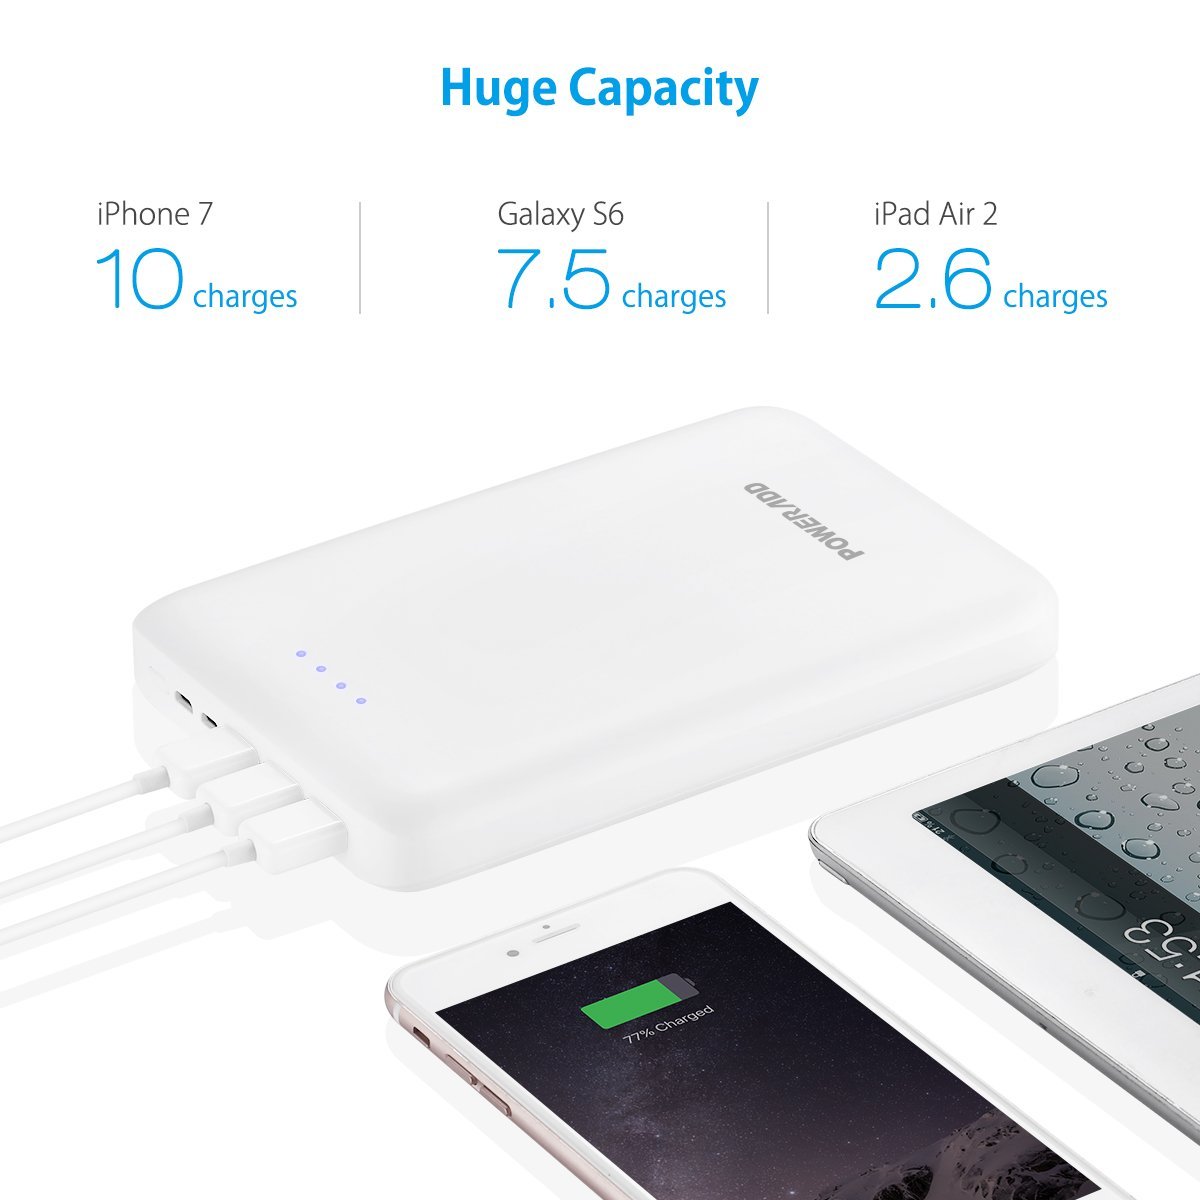 Poweradd External Battery Packs On Sale for Up to 70% Off [Deal]